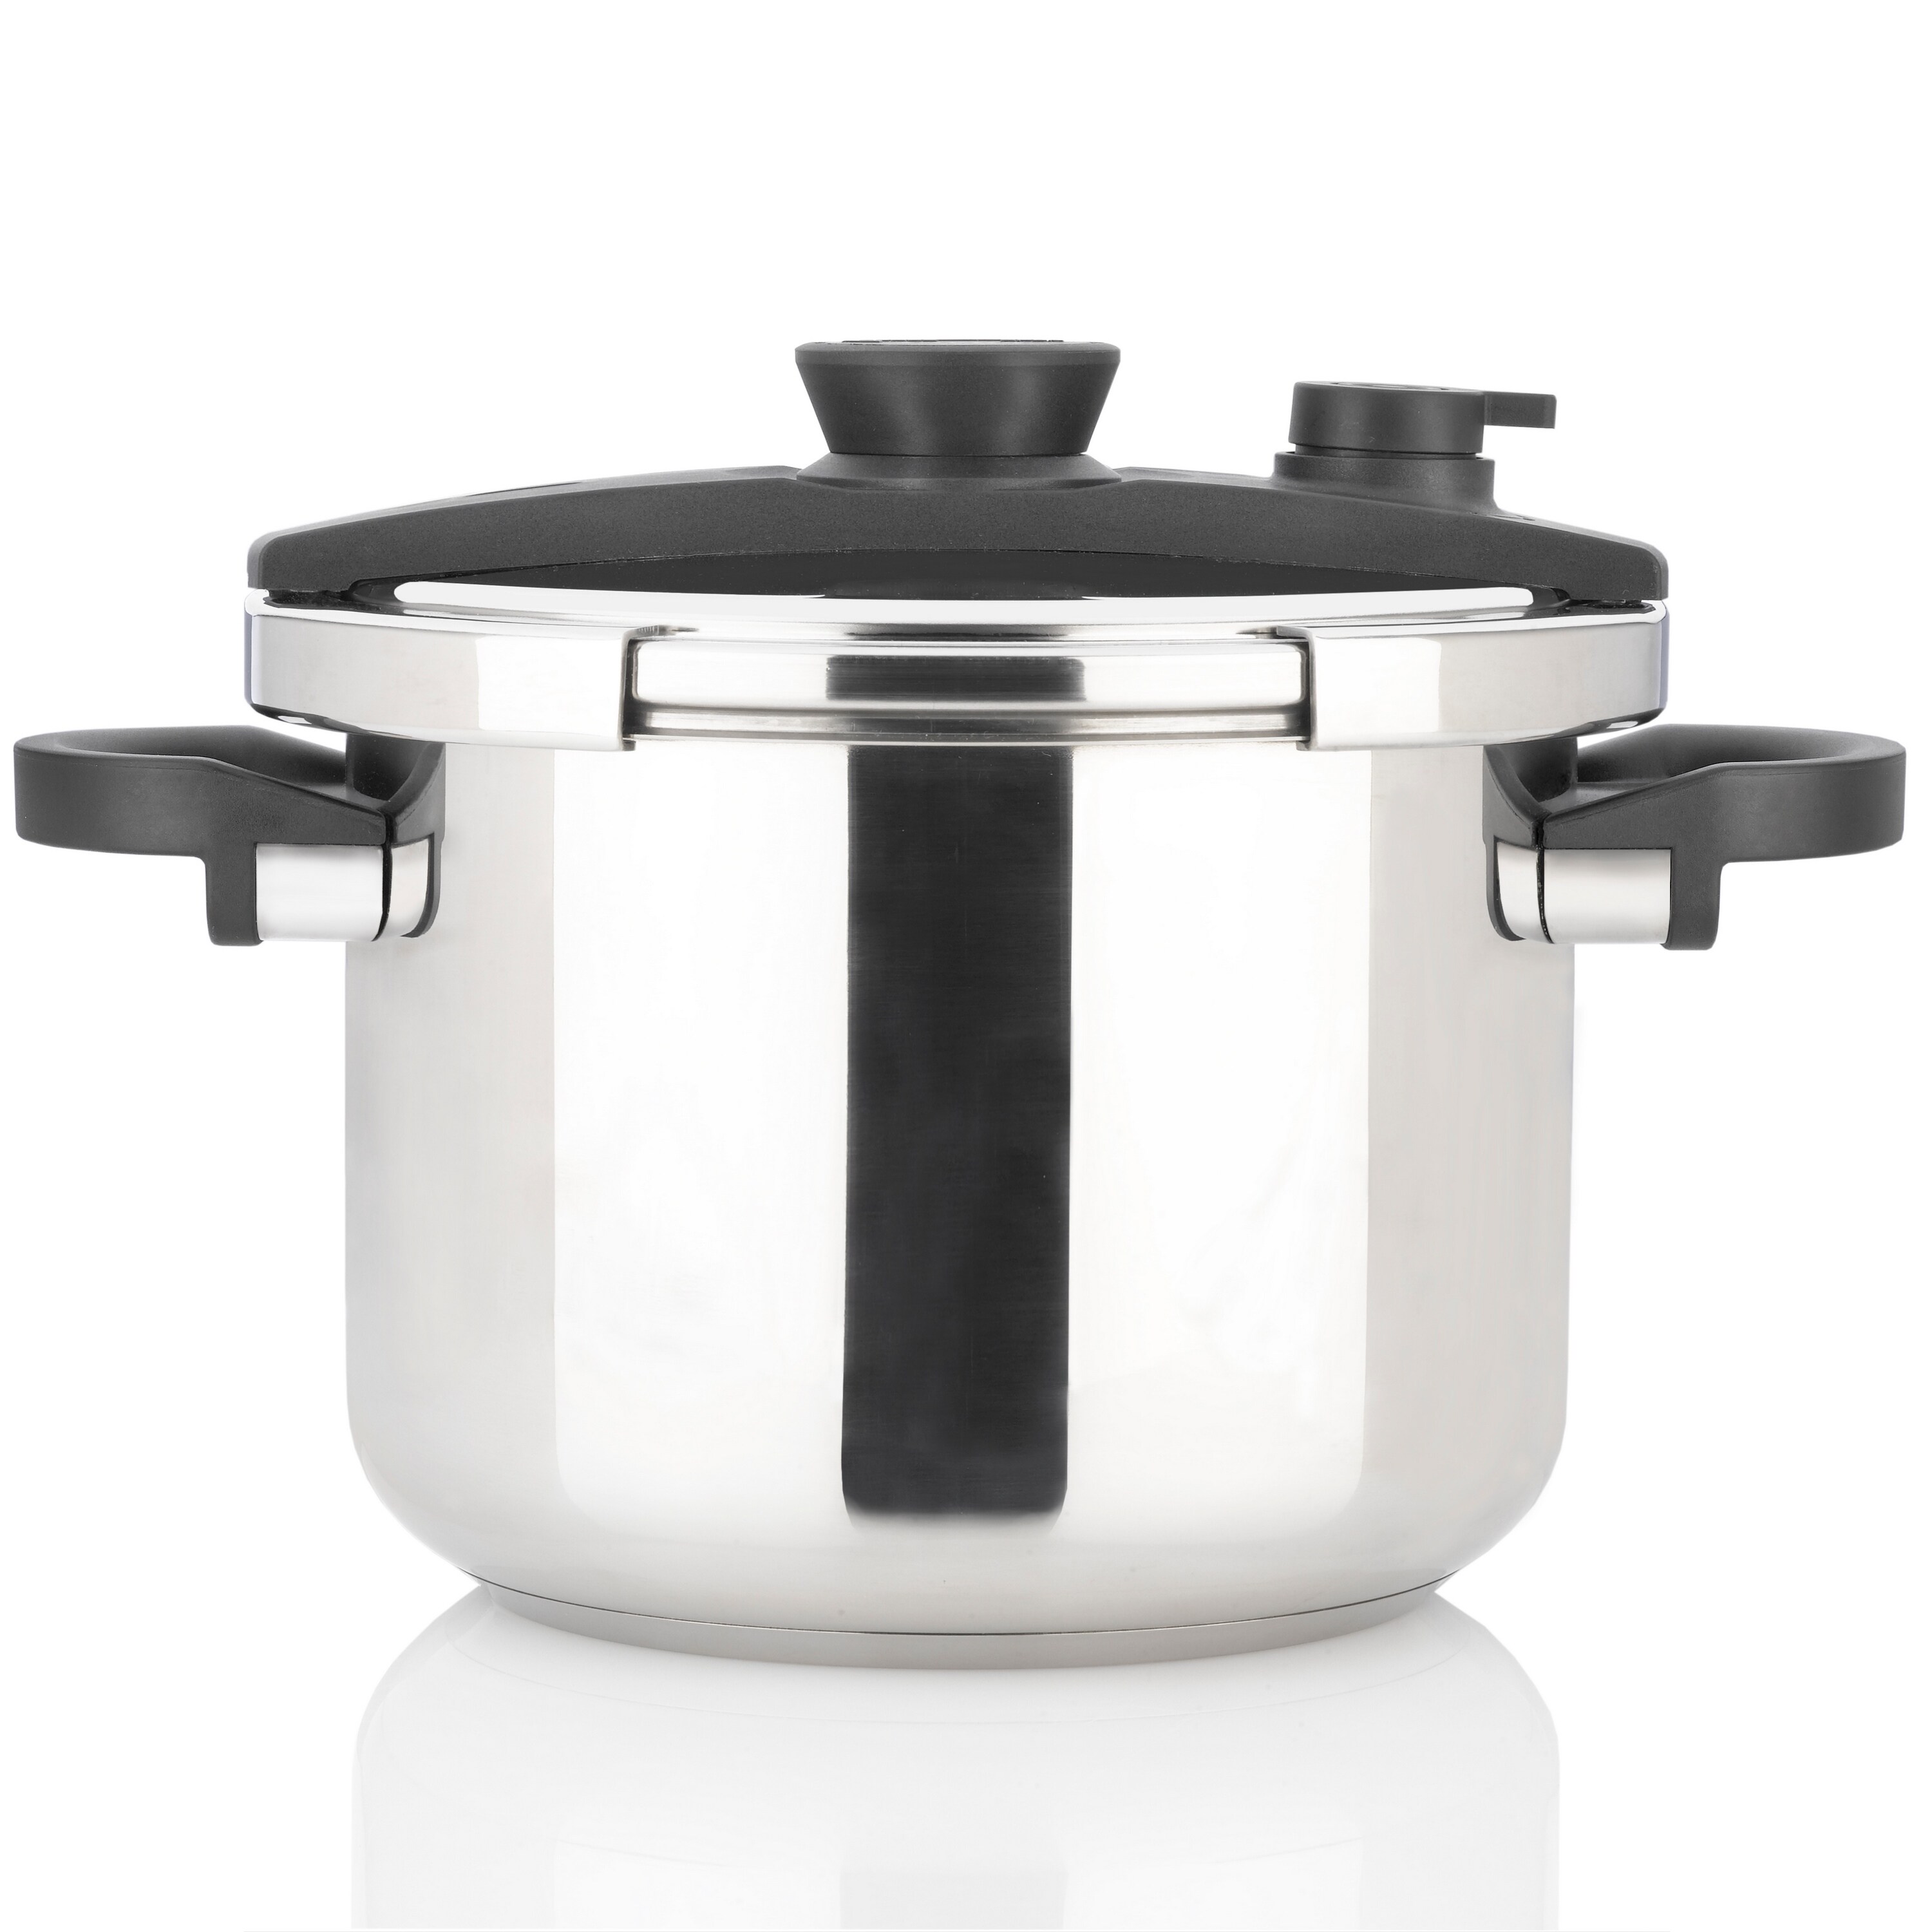 IMUSA IMUSA Electric Stainless Steel PTFE Nonstick Digital Pressure Cooker  5 Quarts - IMUSA